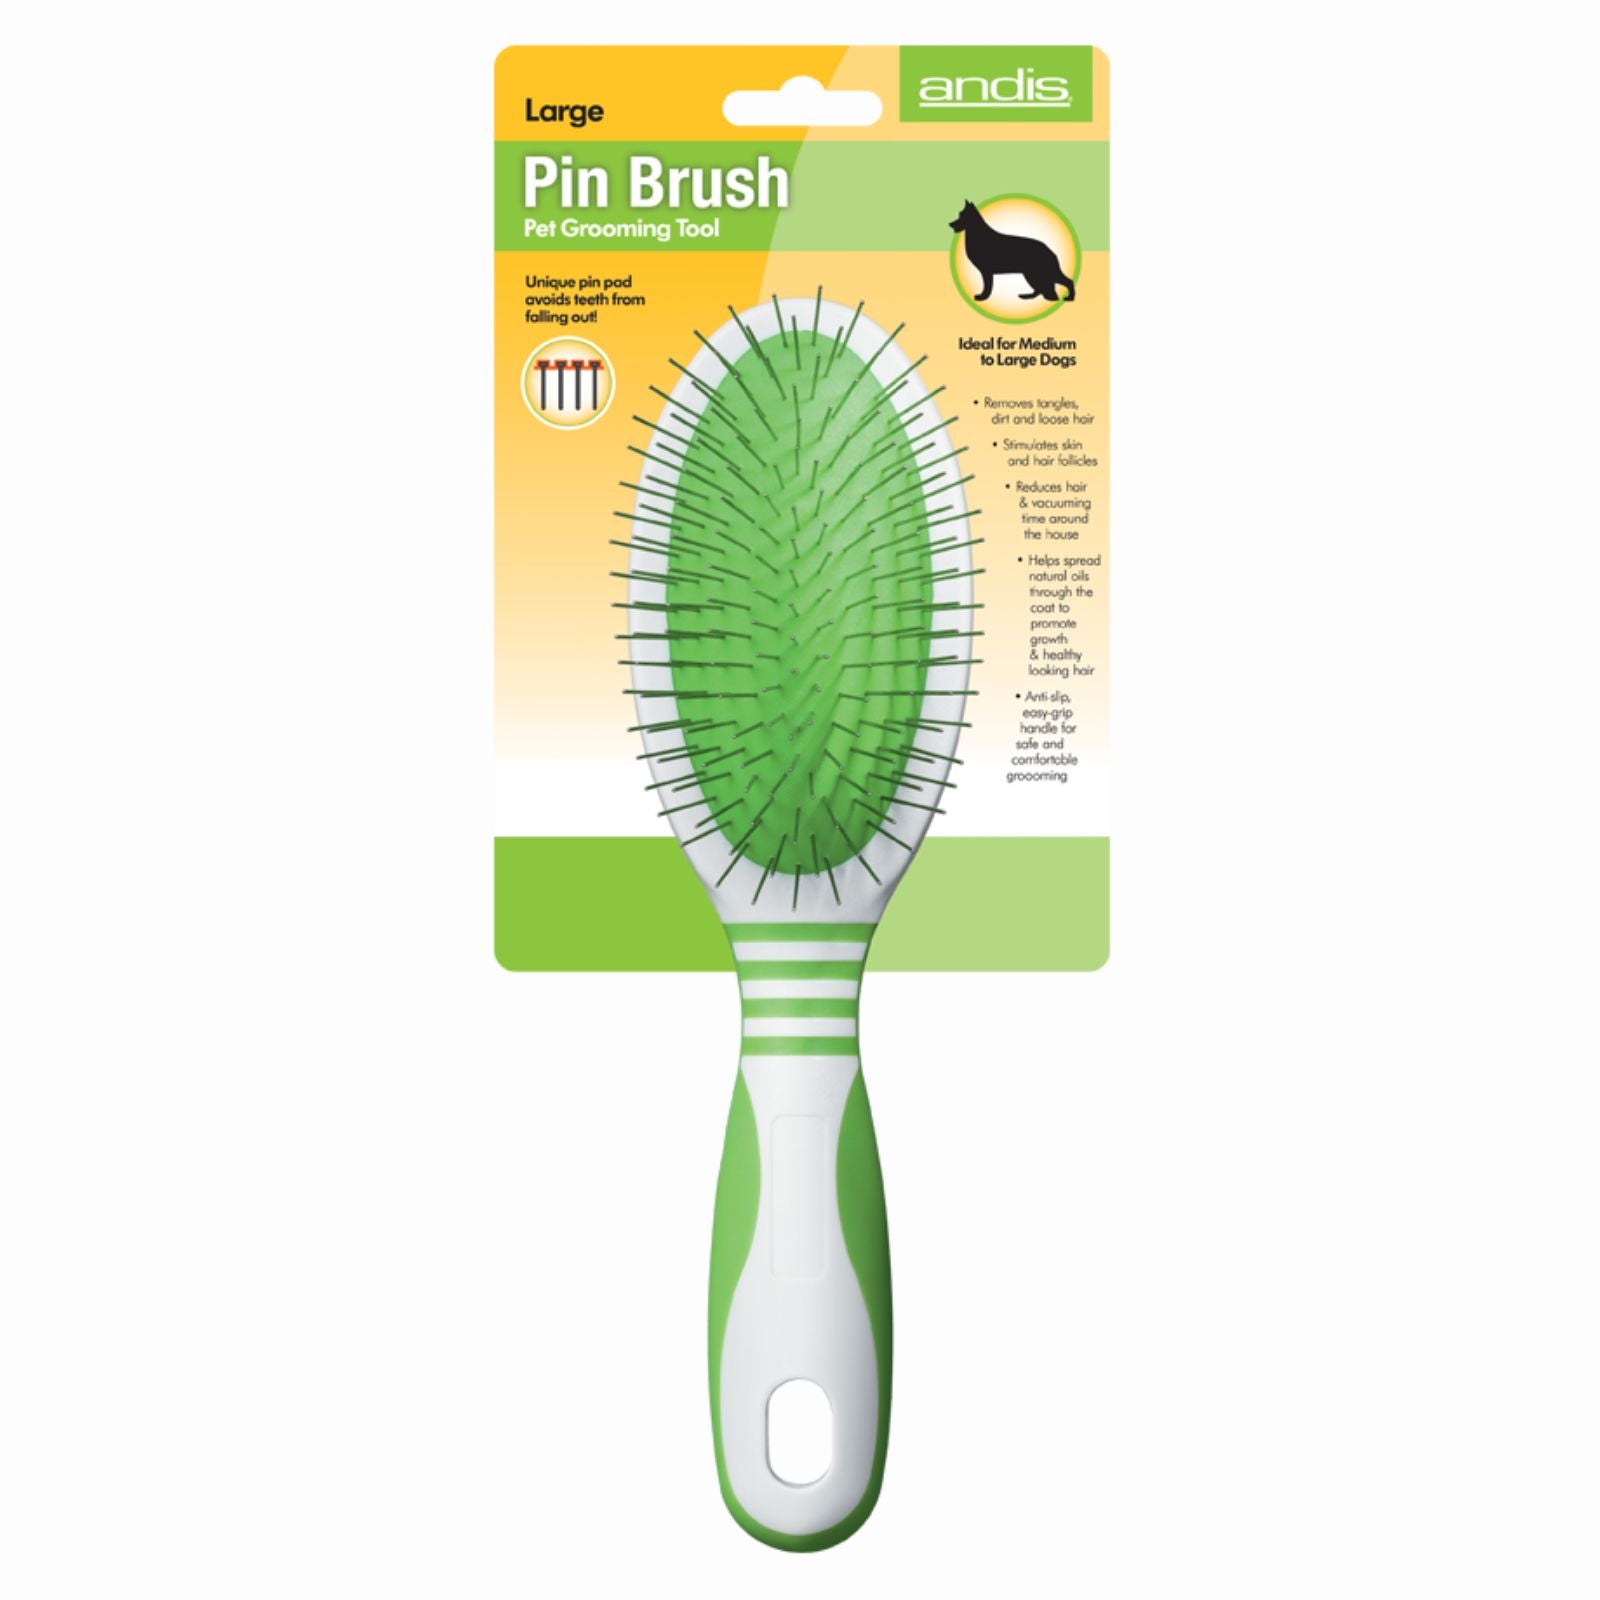 The Andis Large Pin Brush - the ultimate grooming tool for medium to large dogs.